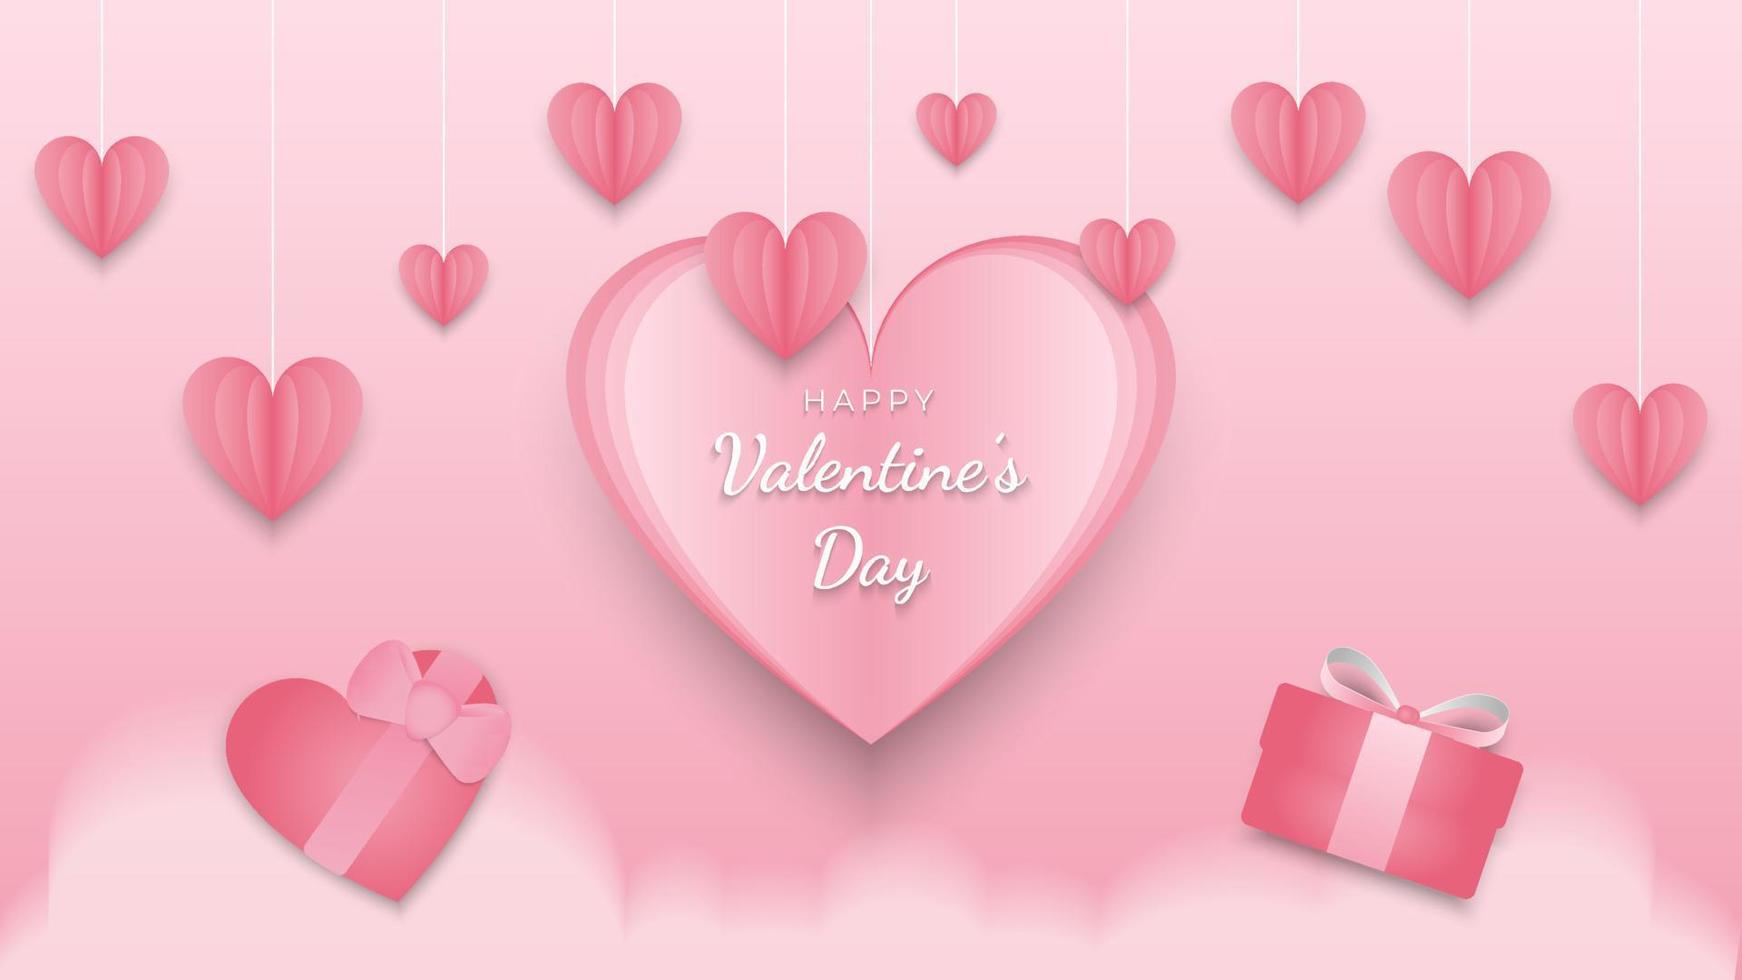 Paper cut style happy valentine's day greeting background with gifts vector